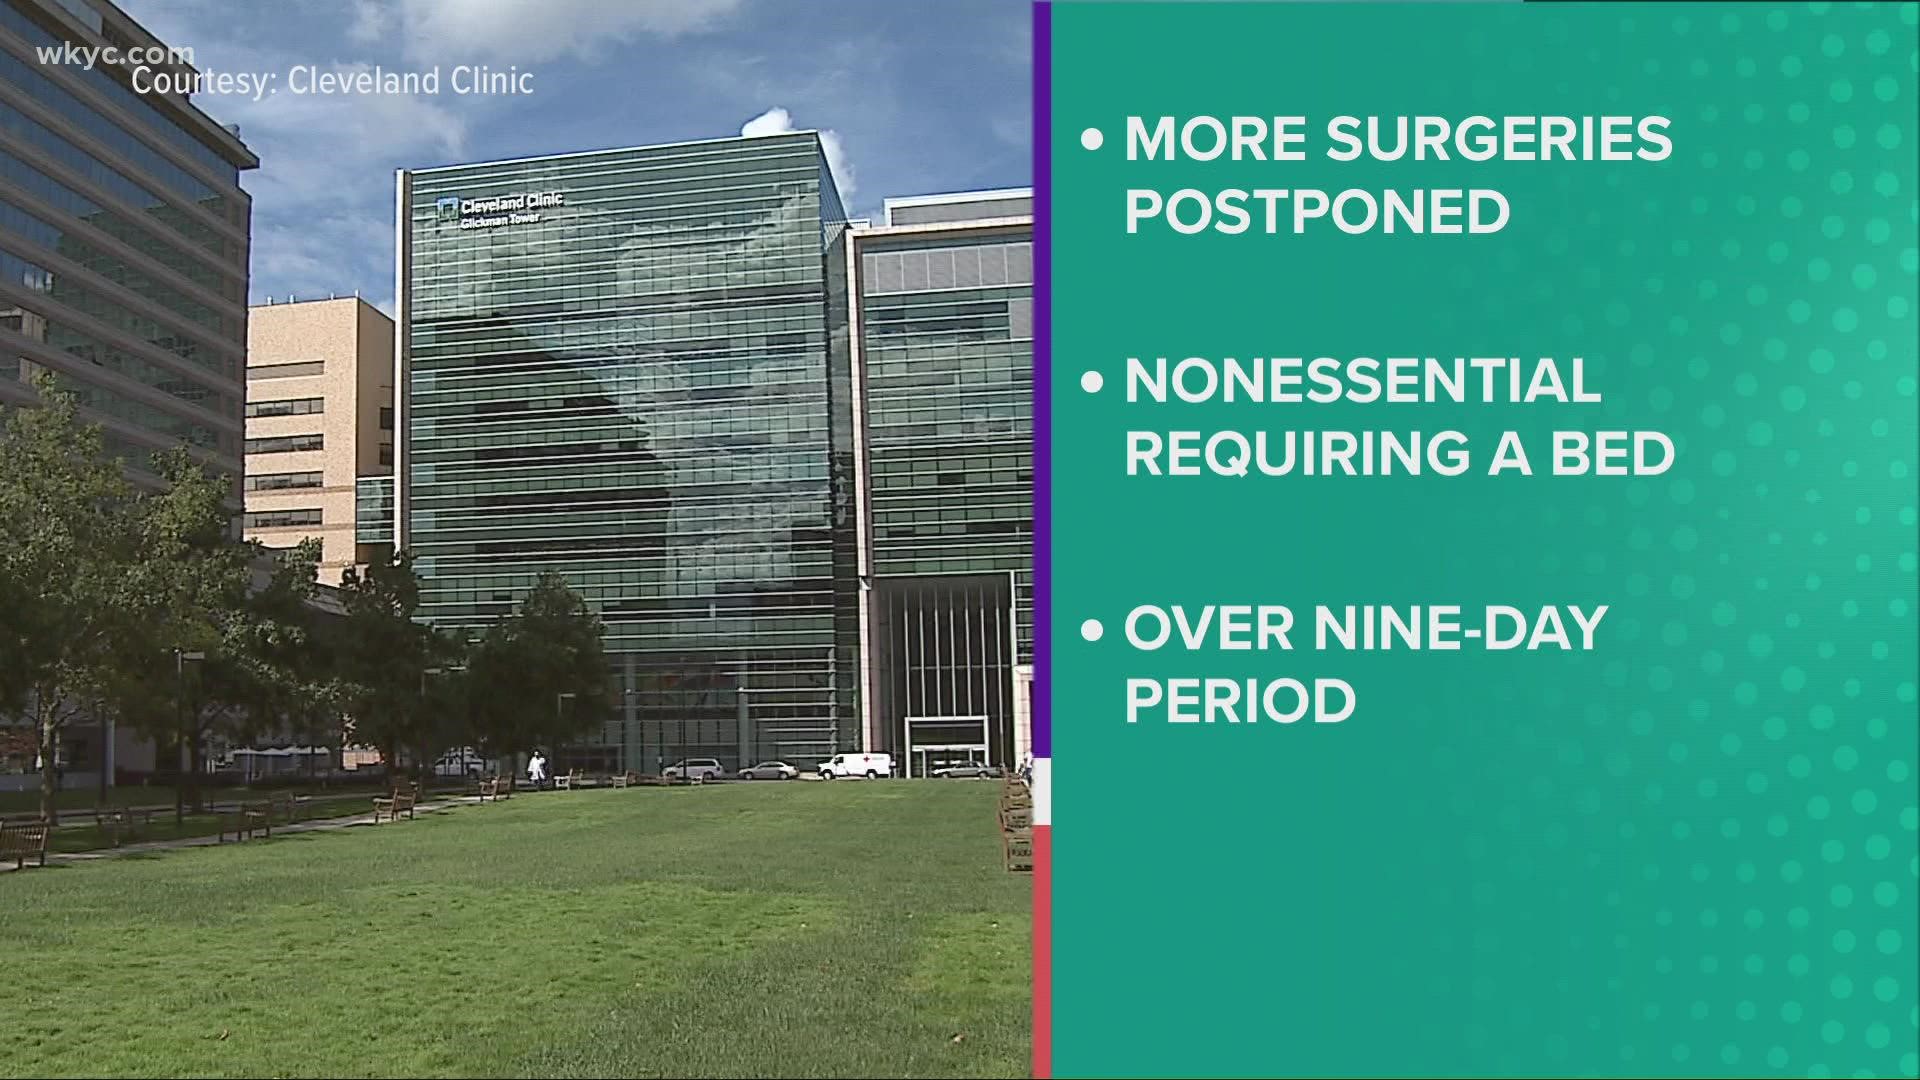 The Cleveland Clinic has announced that it is postponing all nonessential surgeries that require a hospital bed for 9 days or longer.